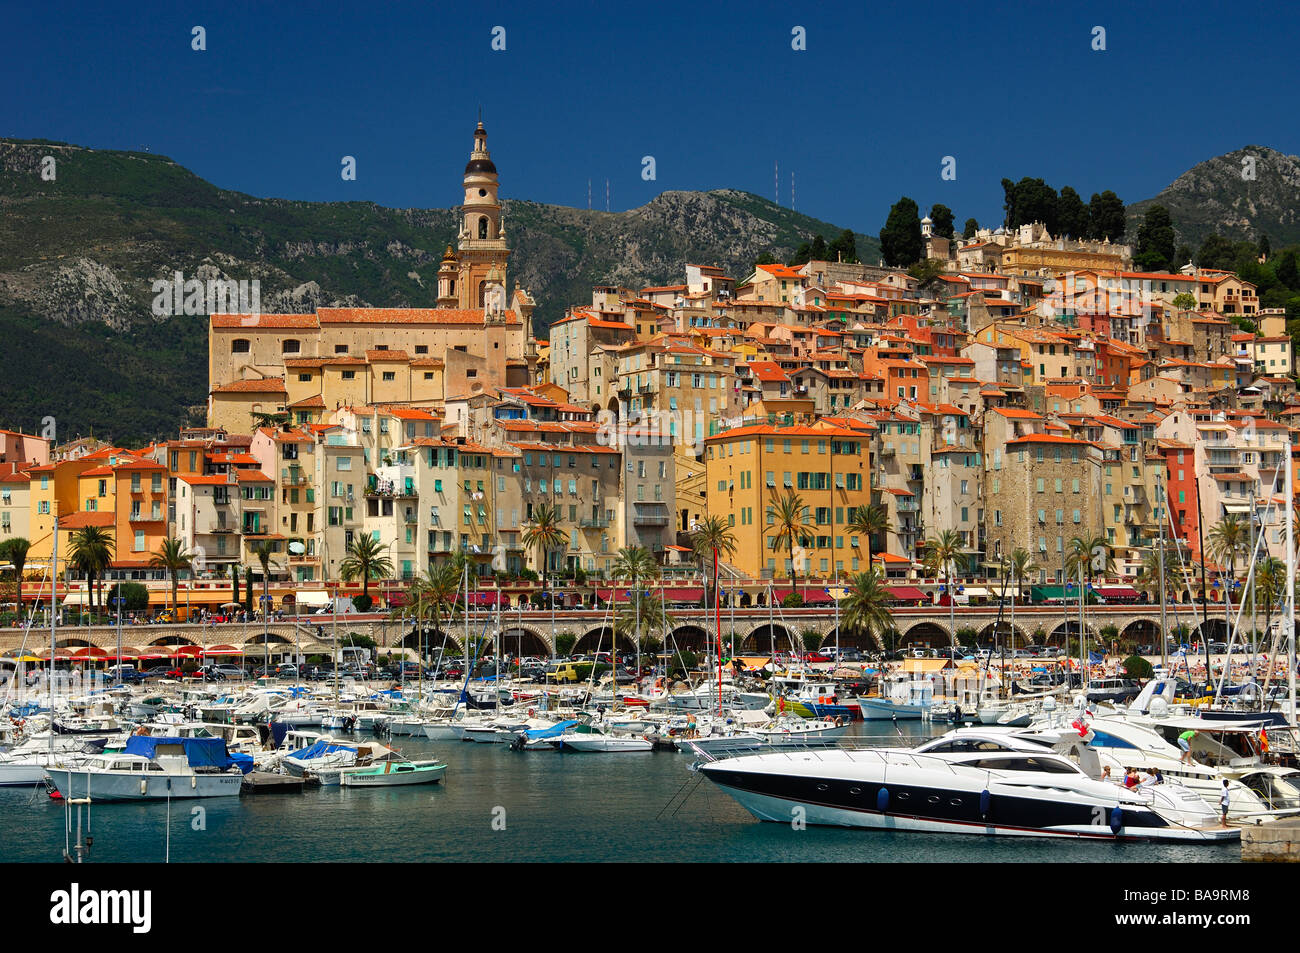 The Old Port of Menton, in the back the Old Town of Menton with the baroque  Saint Michel church, Menton, Côte d Azur, France Stock Photo - Alamy